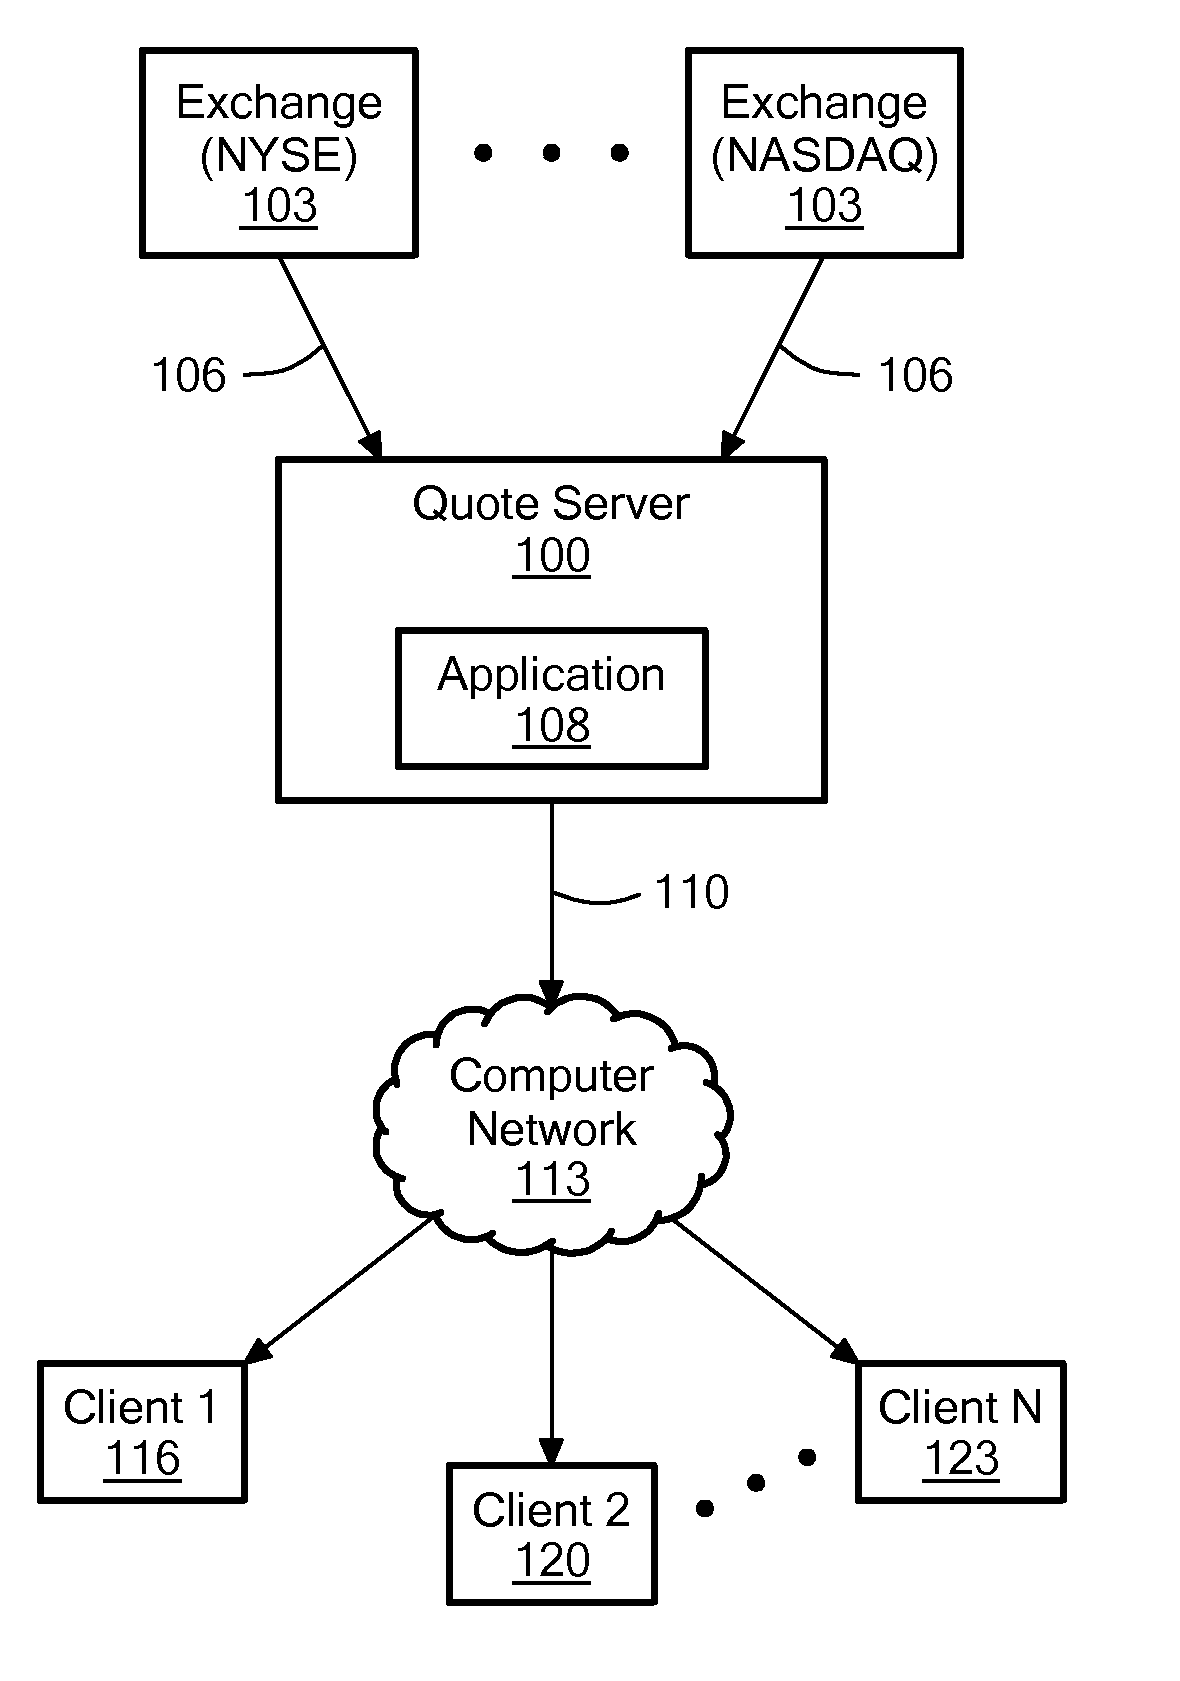 Rate-Adaptive Bundling of Data in a Packetized Communication System